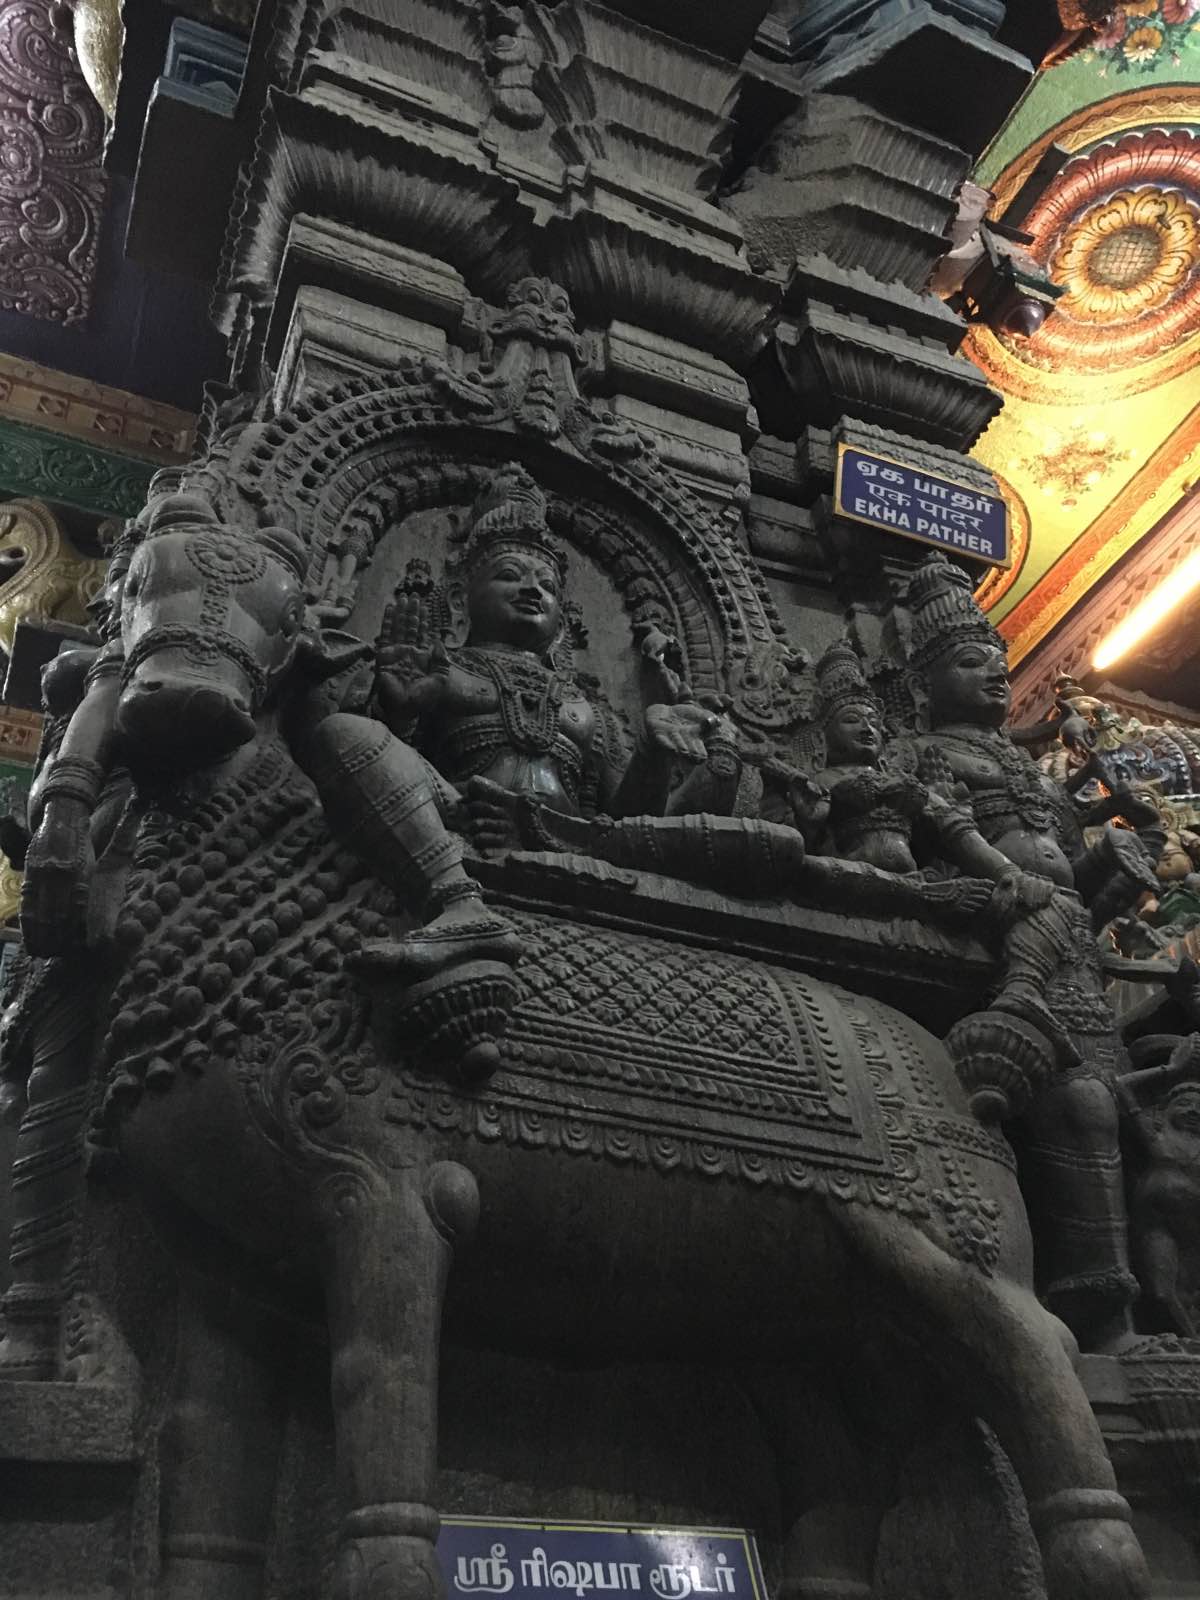 One of the many thousands of statues at the Sri Meenakshi Temple complex in Madurai